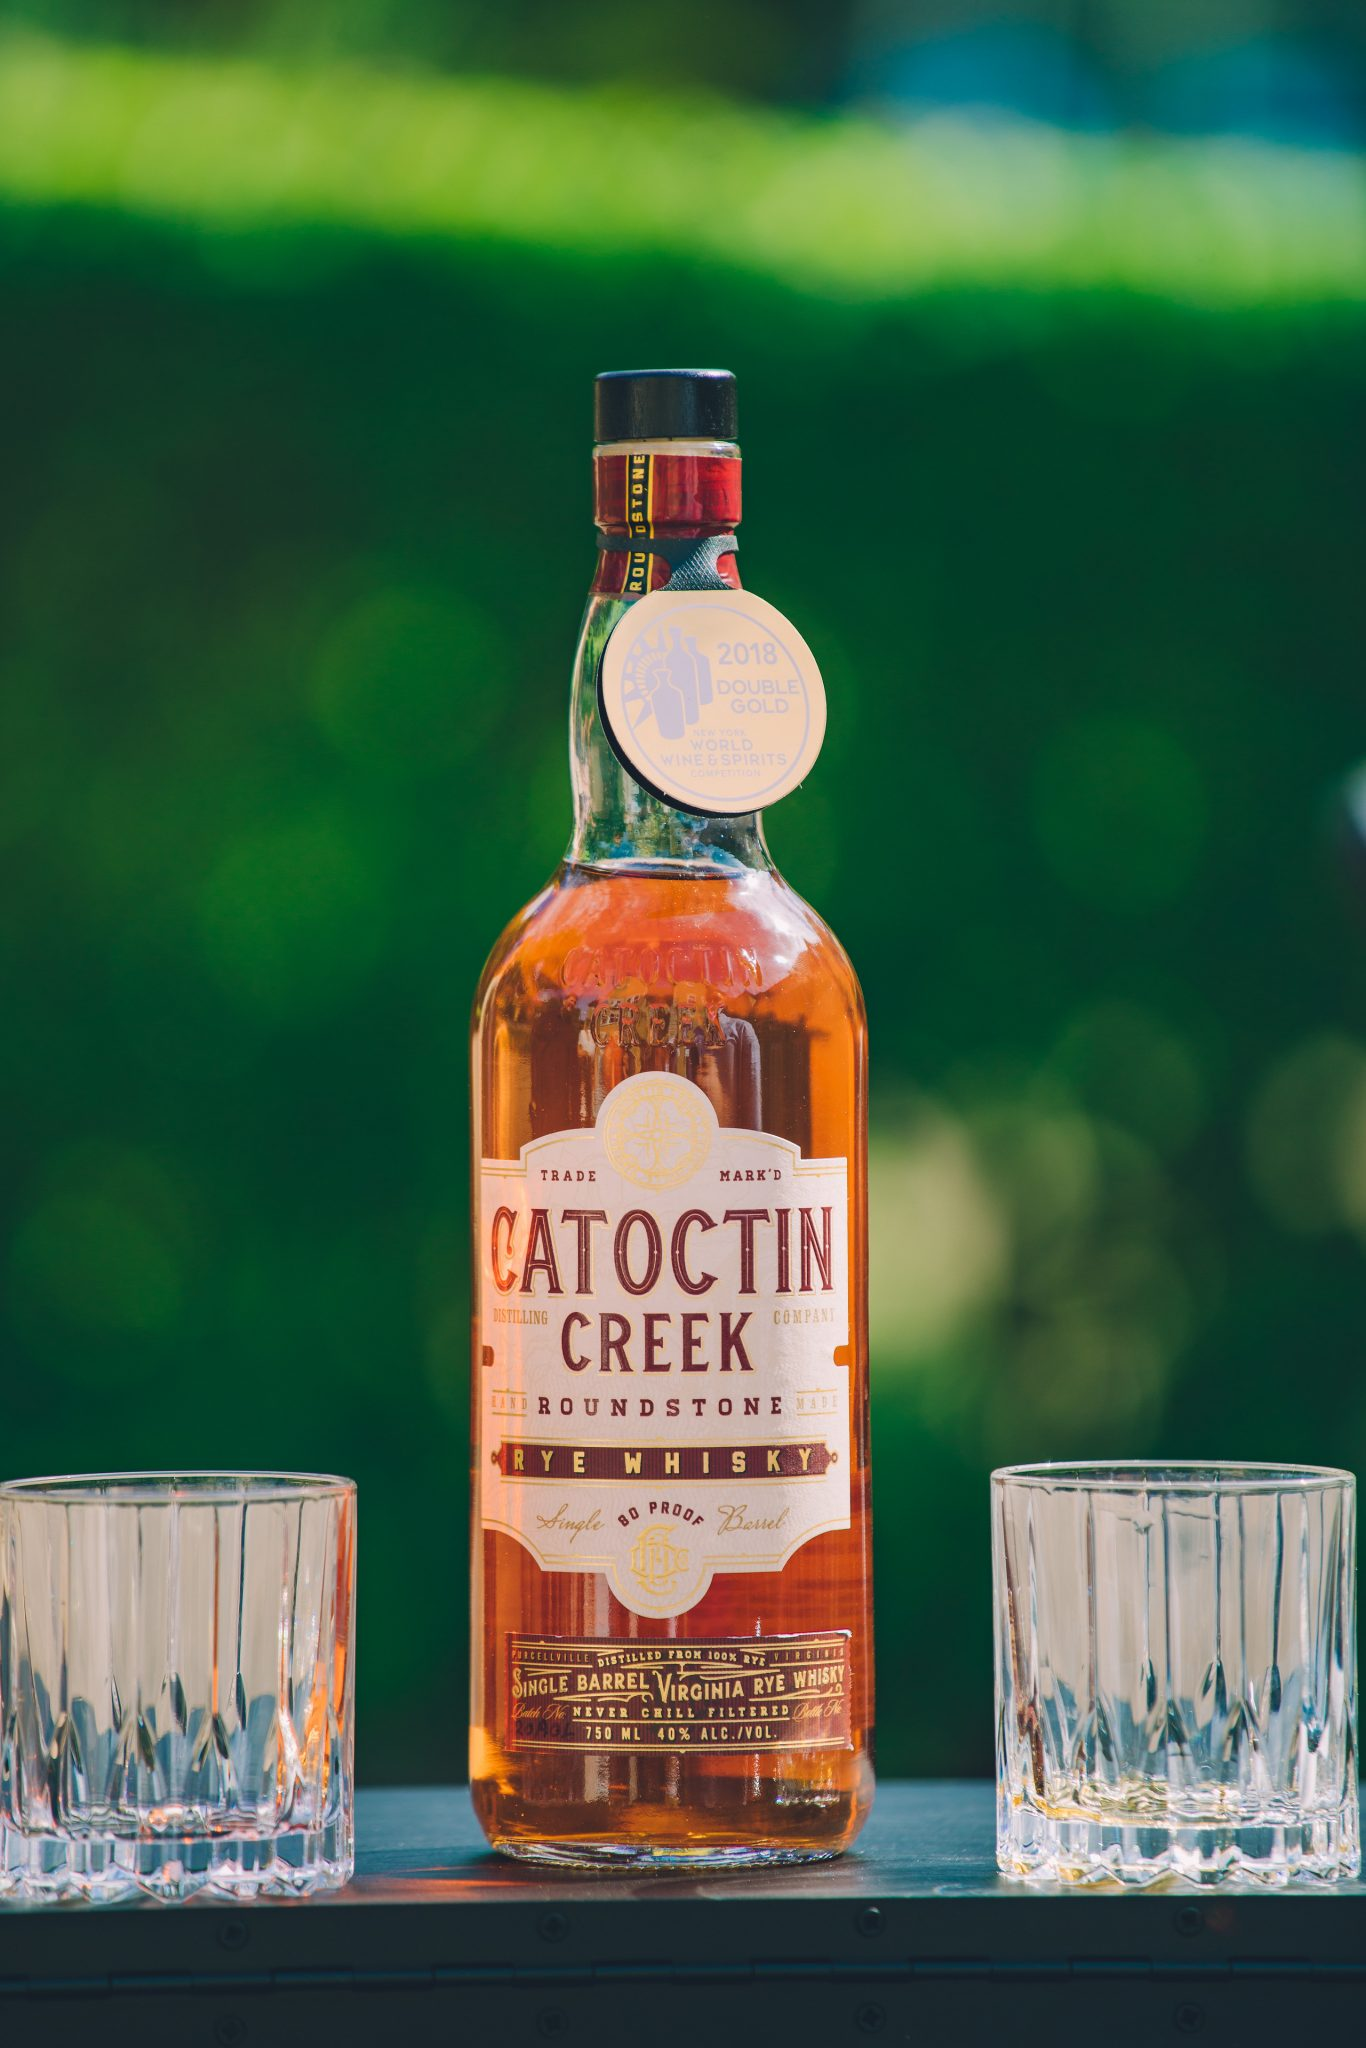 Commercial photo of Catoctin Creek Rye Whisky